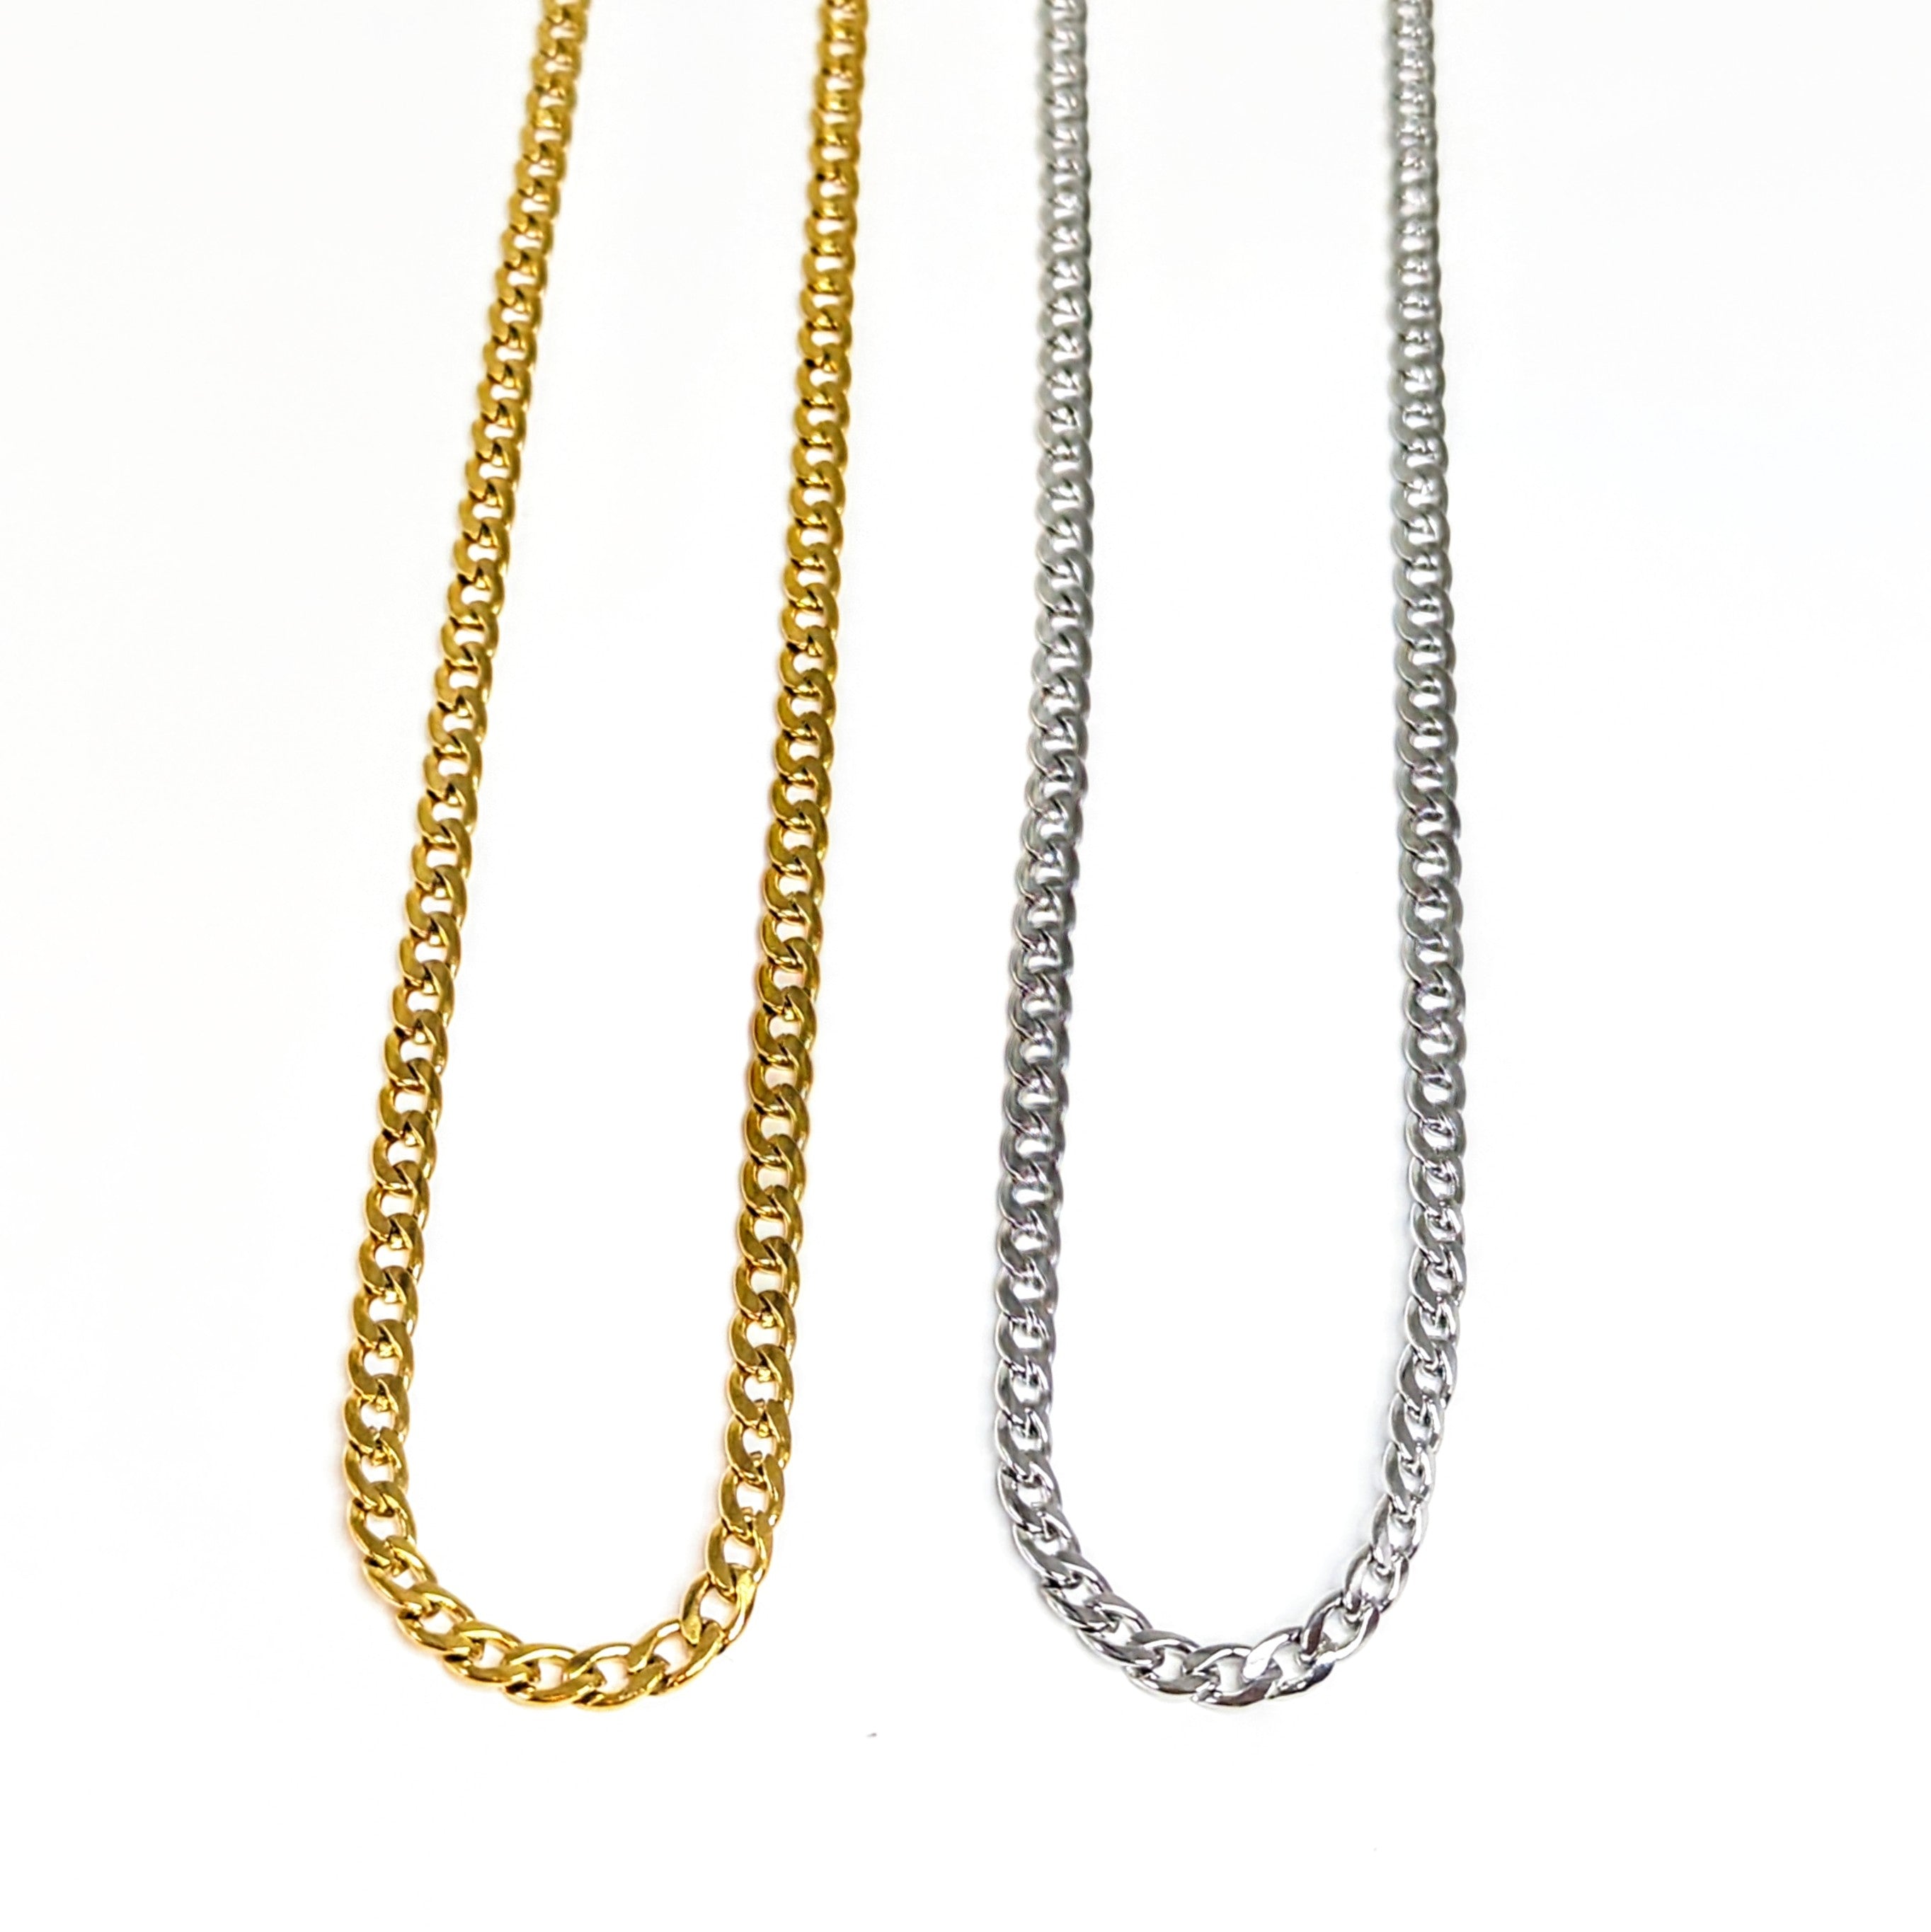 Curb Chain Waterproof Necklace